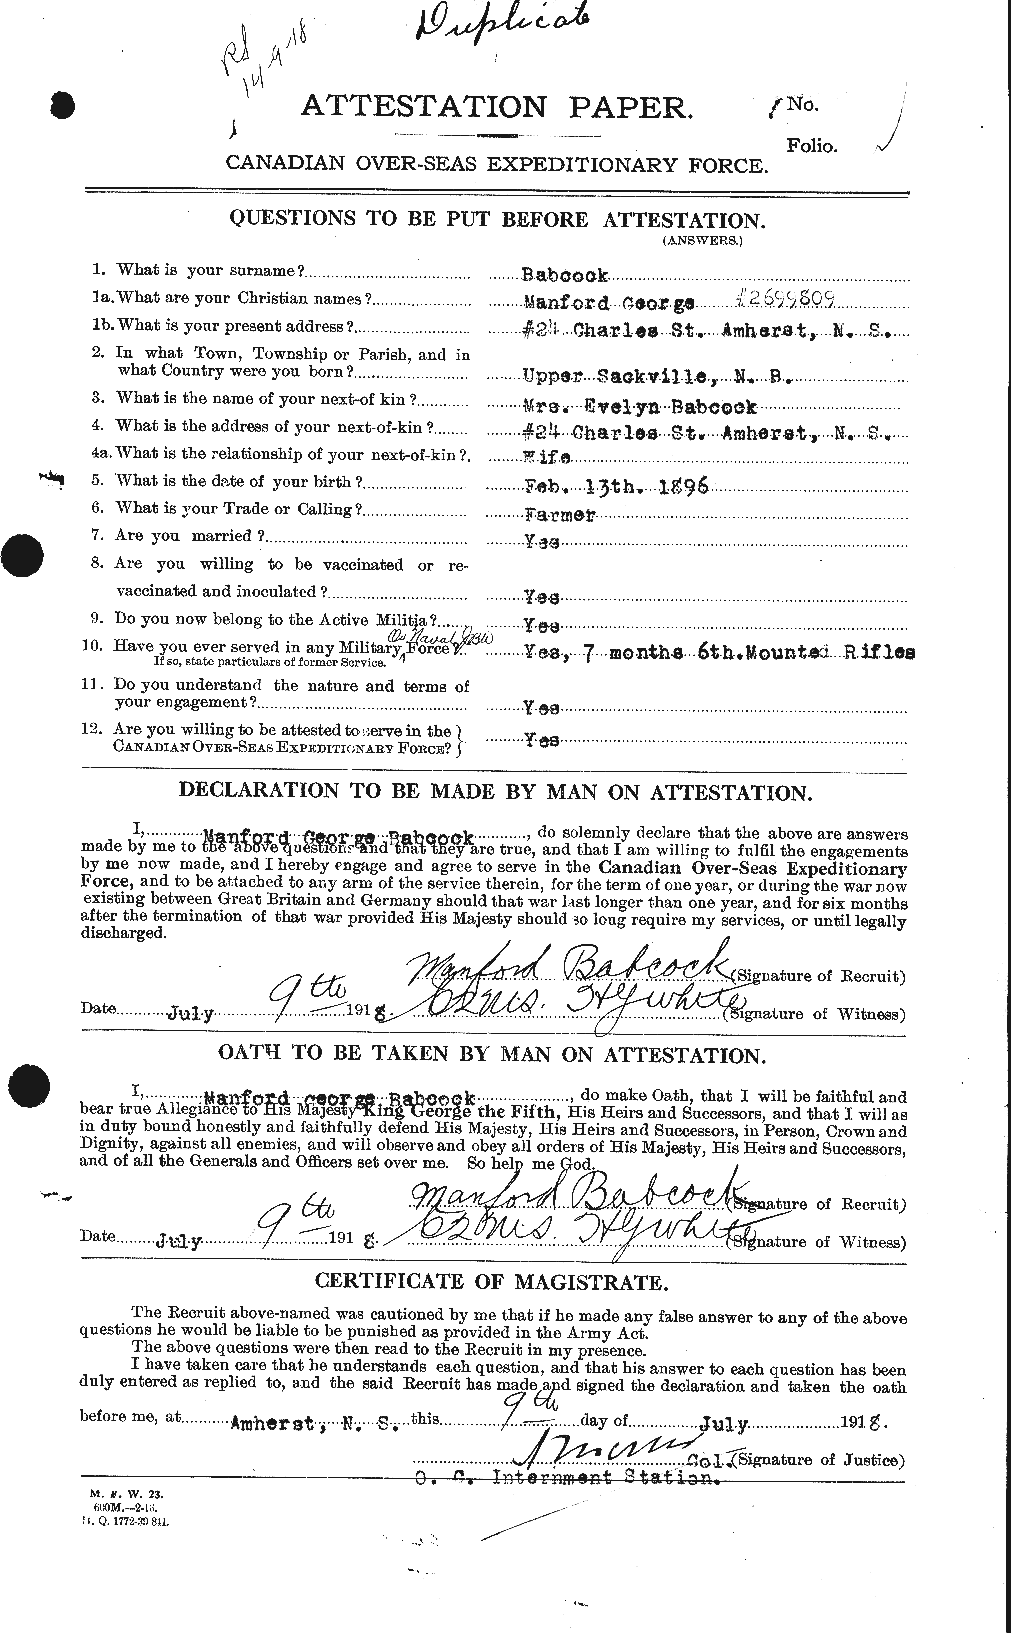 Personnel Records of the First World War - CEF 218219a